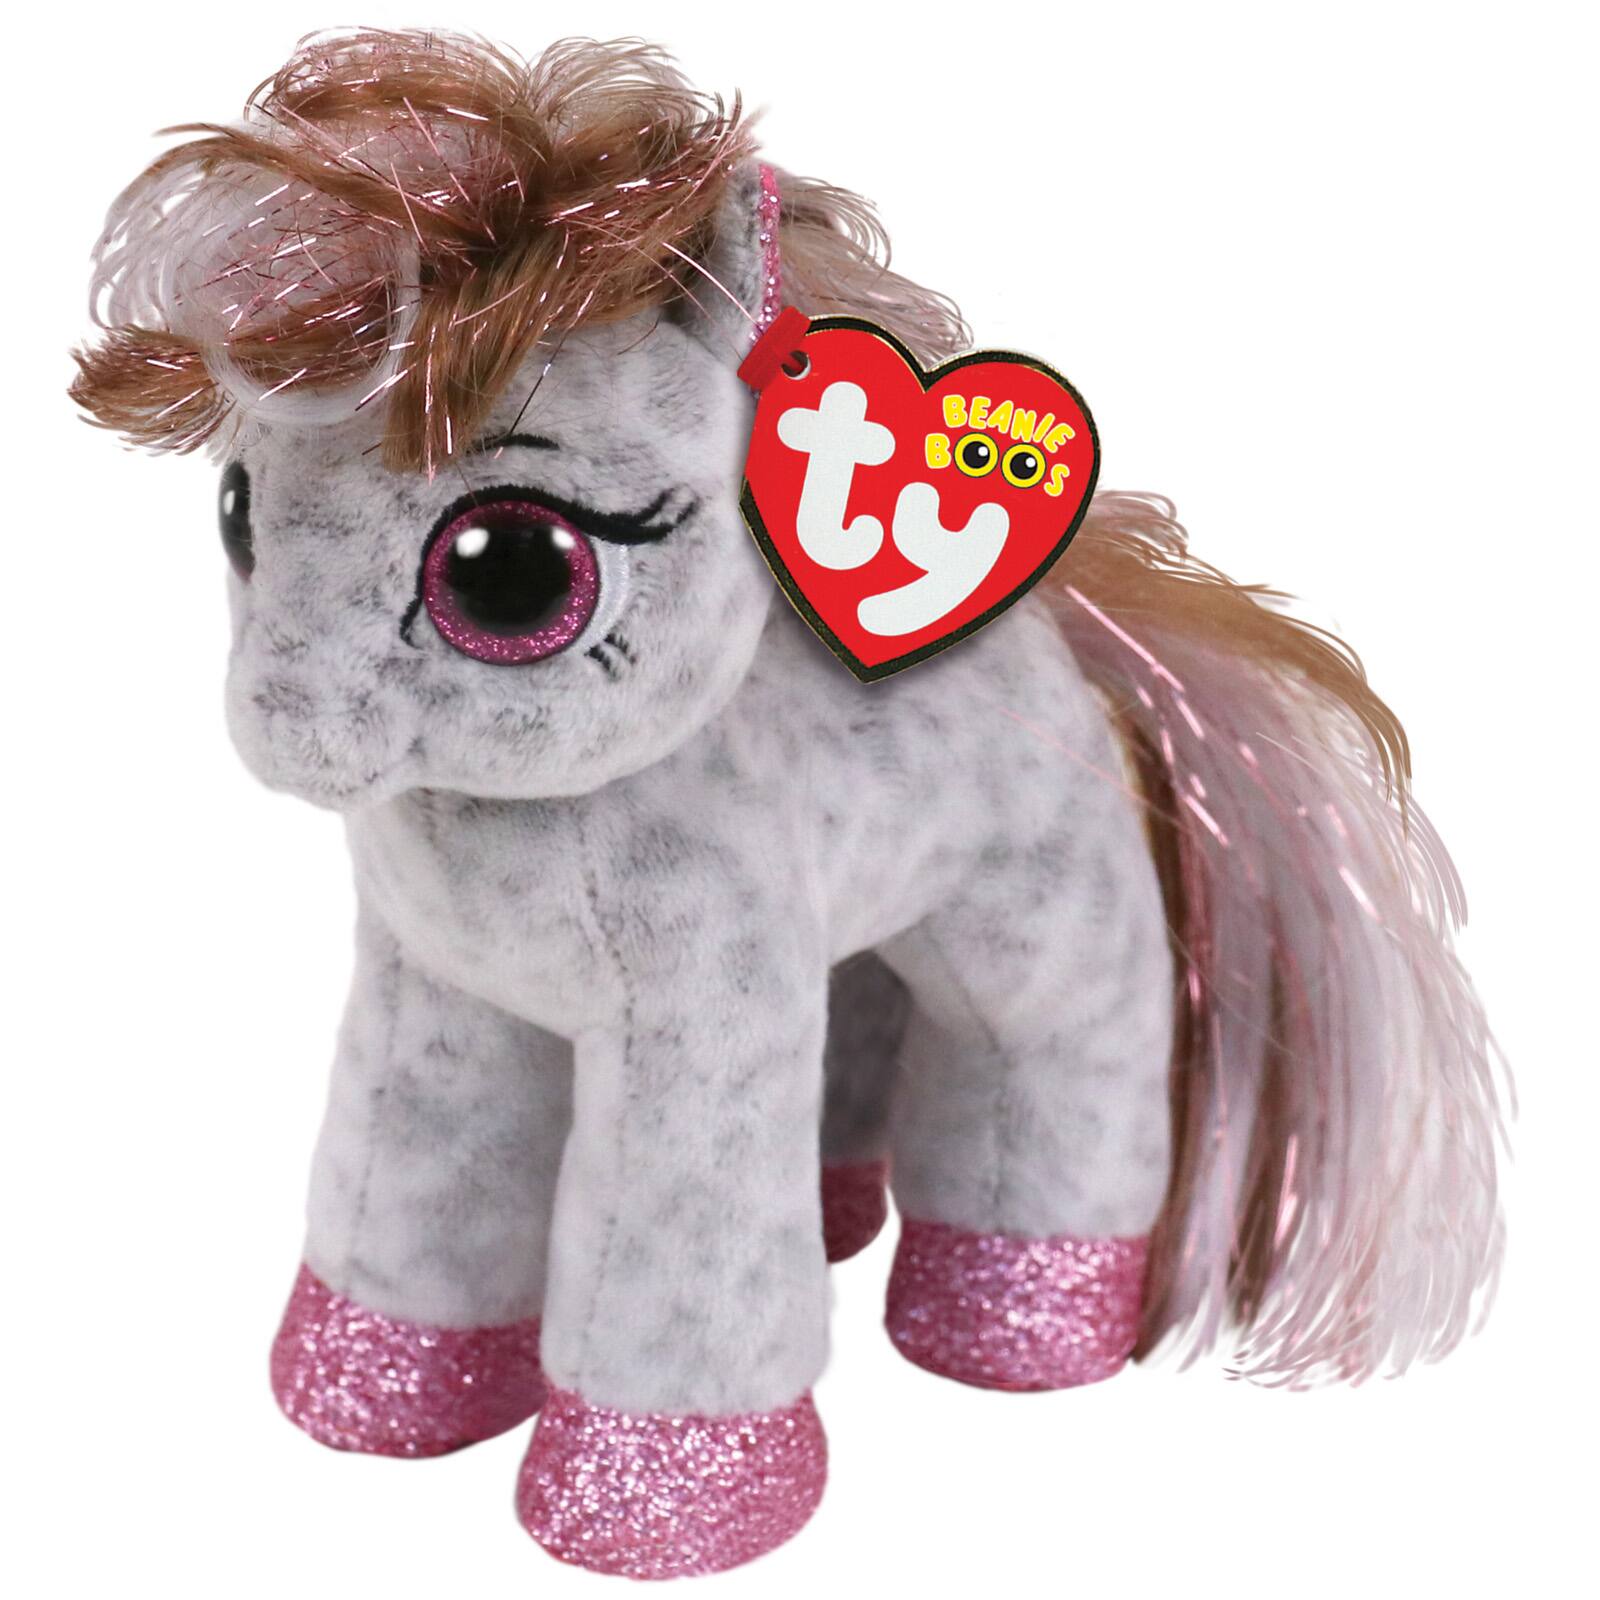 Ty Beanie Boos Cinnamon Spotted Pony Plush Stuffed Animal Toy 7 in Sparkle Eyes for sale online 